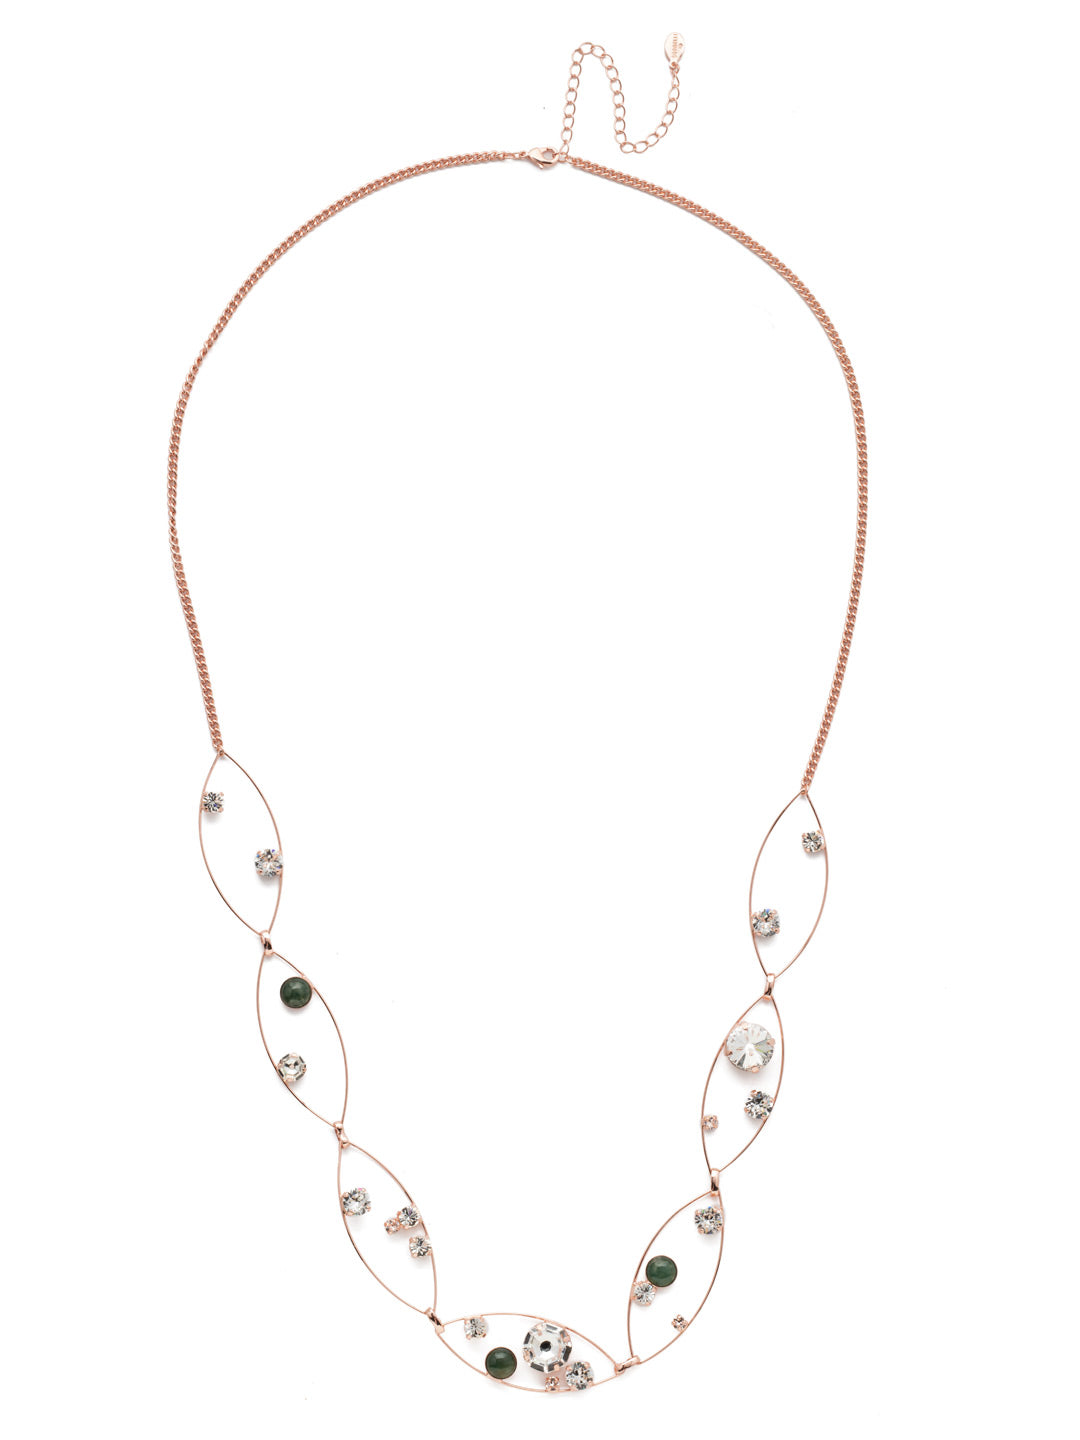 Esme Long Necklace - 4NEP10RGIND - <p>Airy and one-of-a-kind, the Esme Long Necklace is a stunning piece. It's delicate with open-air metalwork, and shimmers with circular crystals of various sizes. From Sorrelli's Industrial collection in our Rose Gold-tone finish.</p>